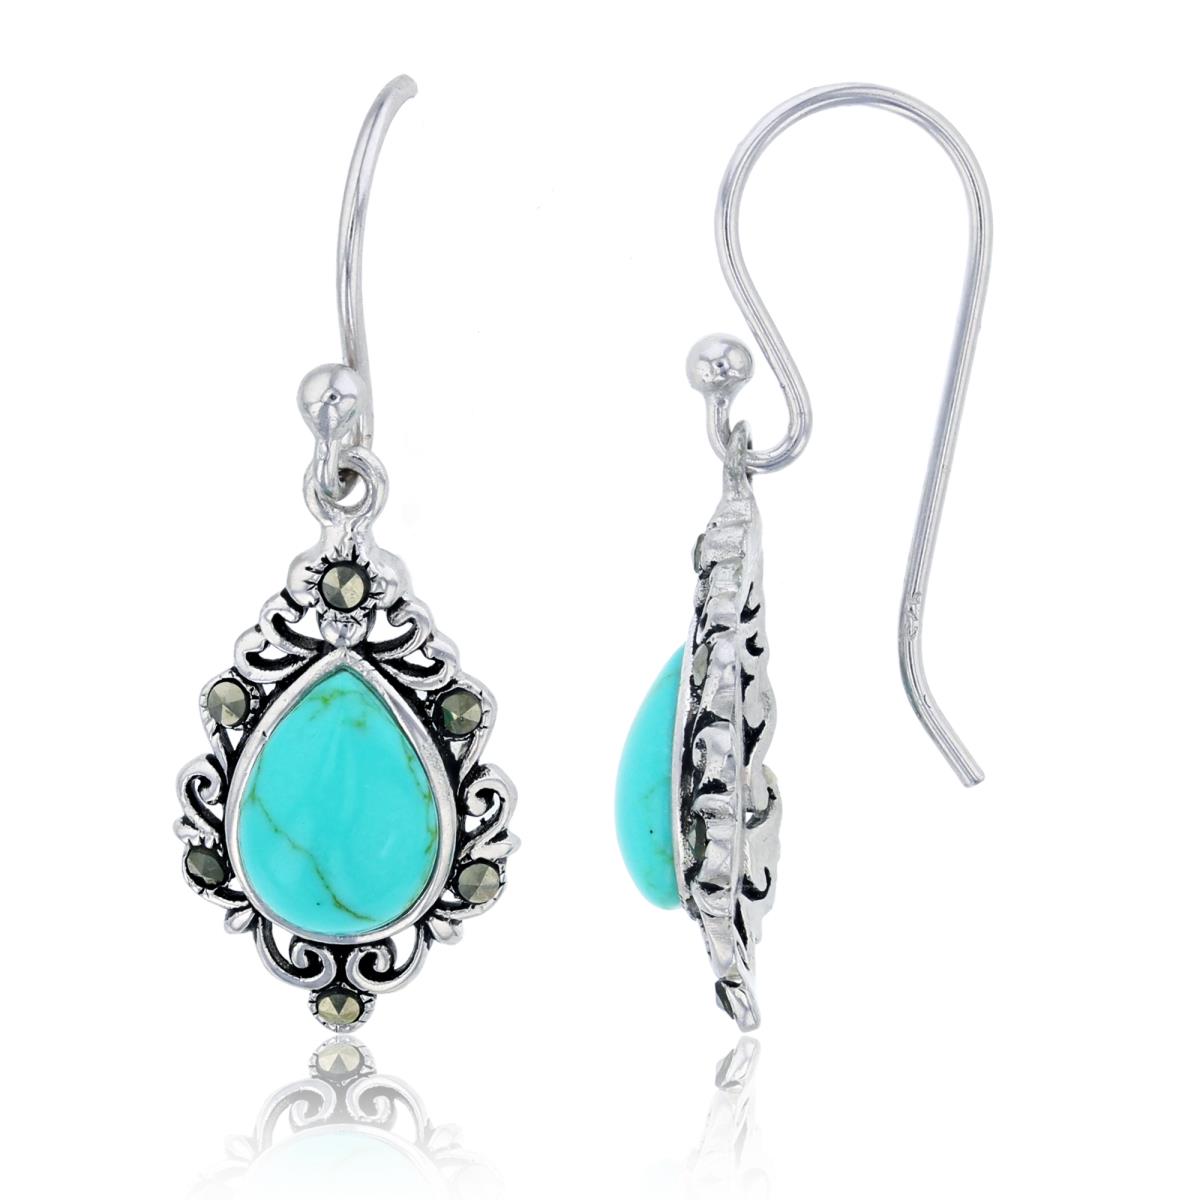 Sterling Silver Oxidized 8x6mm Pear Cut Turquoise & Round Cut Marcasite Filigree Dangling Fish-Hook Earring